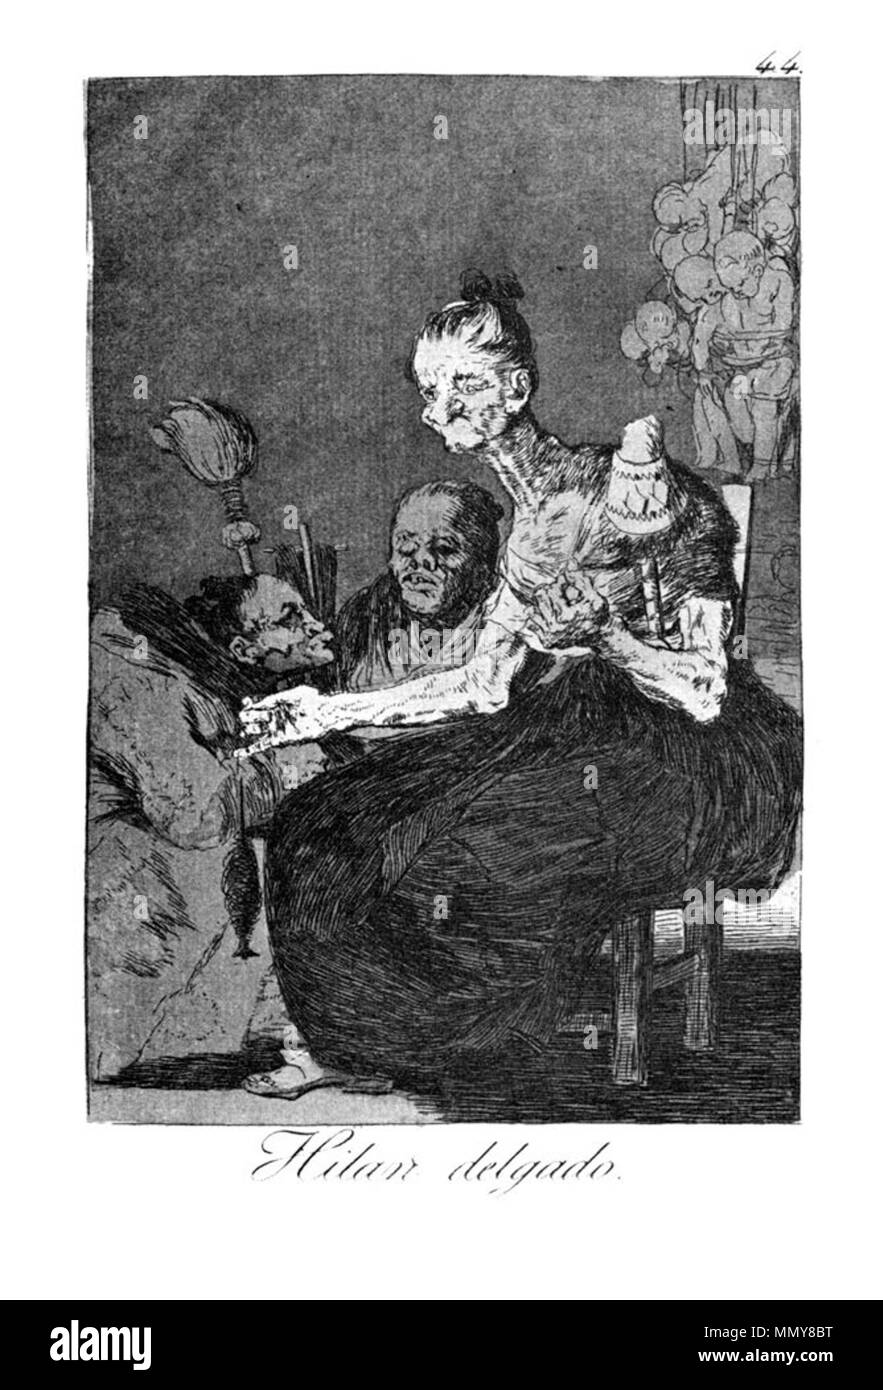 . Los Caprichos is a set of 80 aquatint prints created by Francisco Goya for release in 1799.  . 1799.   Francisco Goya  (1746–1828)      Alternative names Francisco Goya Lucientes, Francisco de Goya y Lucientes, Francisco José Goya Lucientes  Description Spanish painter, printmaker, lithographer, engraver and etcher  Date of birth/death 30 March 1746 16 April 1828  Location of birth/death Fuendetodos Bordeaux  Work location Madrid, Zaragoza, Bordeaux  Authority control  : Q5432 VIAF:?54343141 ISNI:?0000 0001 2280 1608 ULAN:?500118936 LCCN:?n79003363 NLA:?36545788 WorldCat Goya - Caprichos (44 Stock Photo